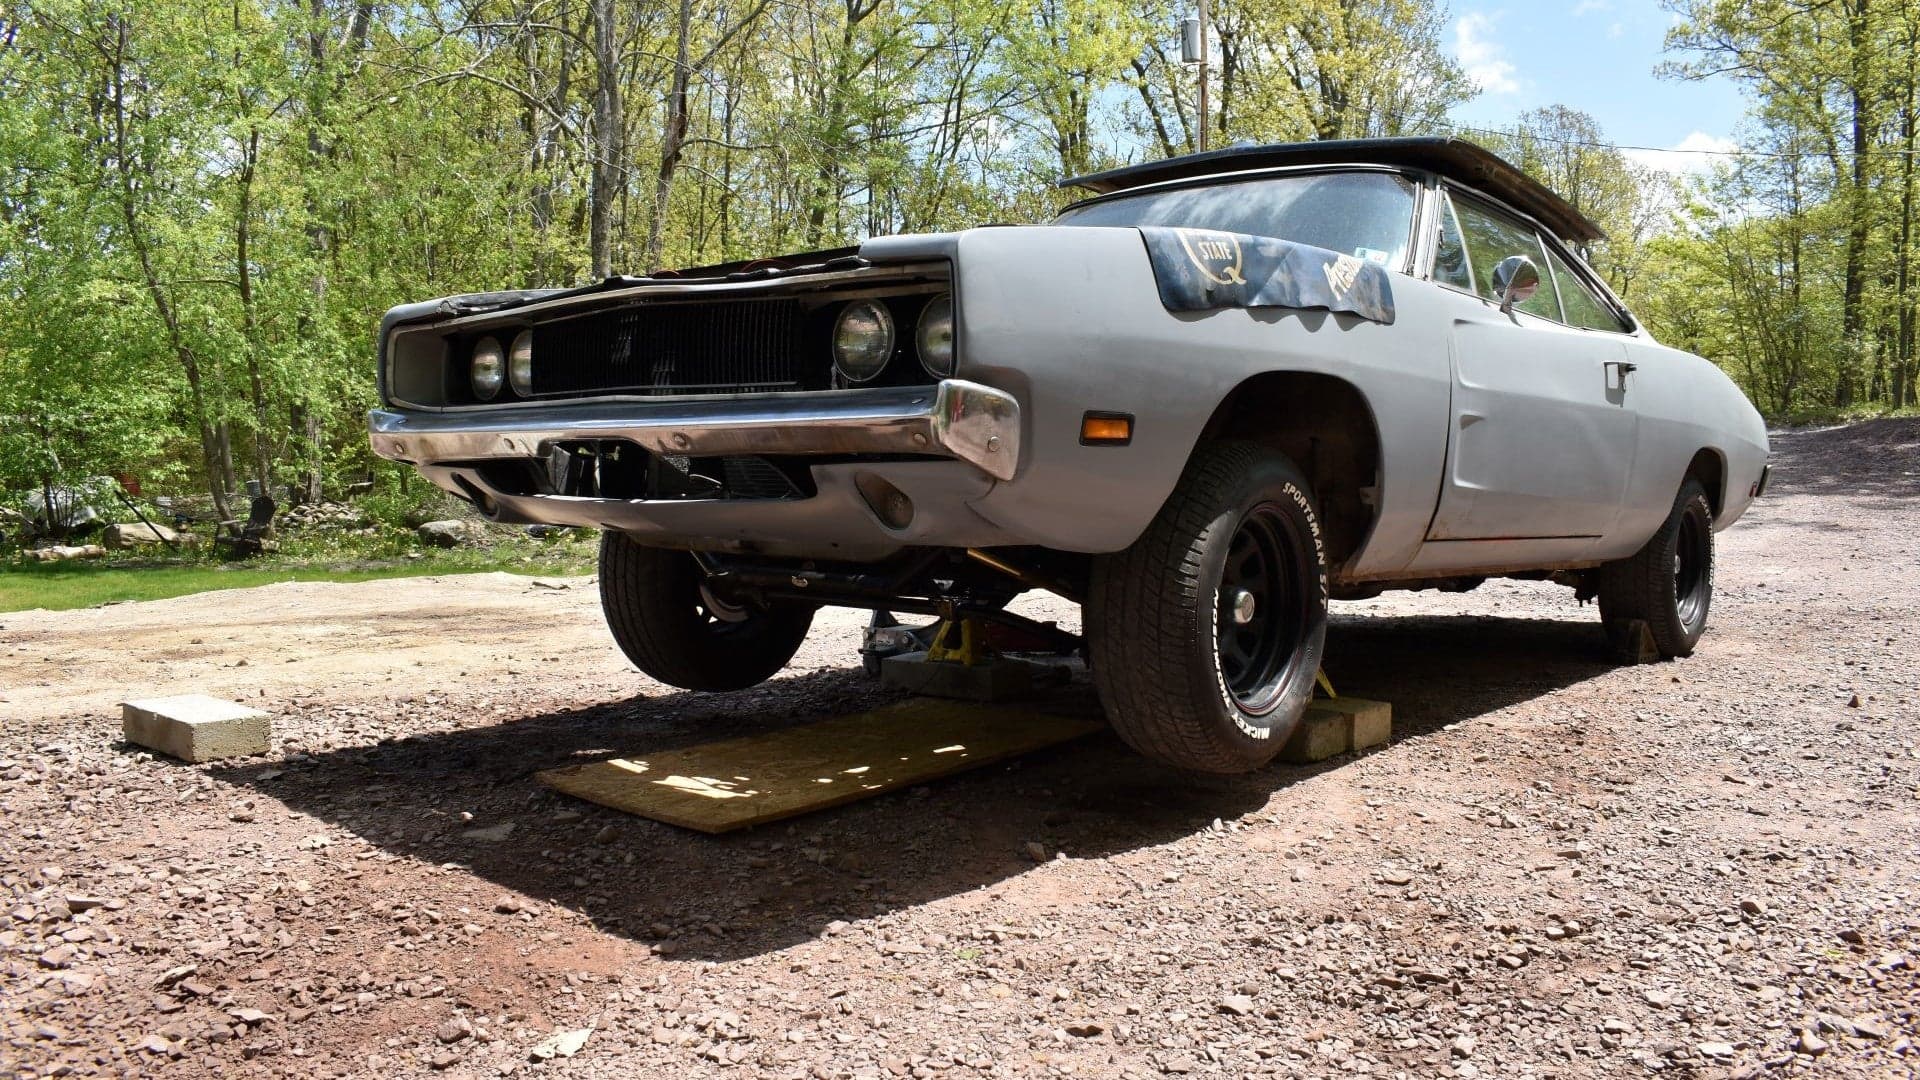 1969 Dodge Charger Project Car Update: Let’s Deal With That Floating Steering